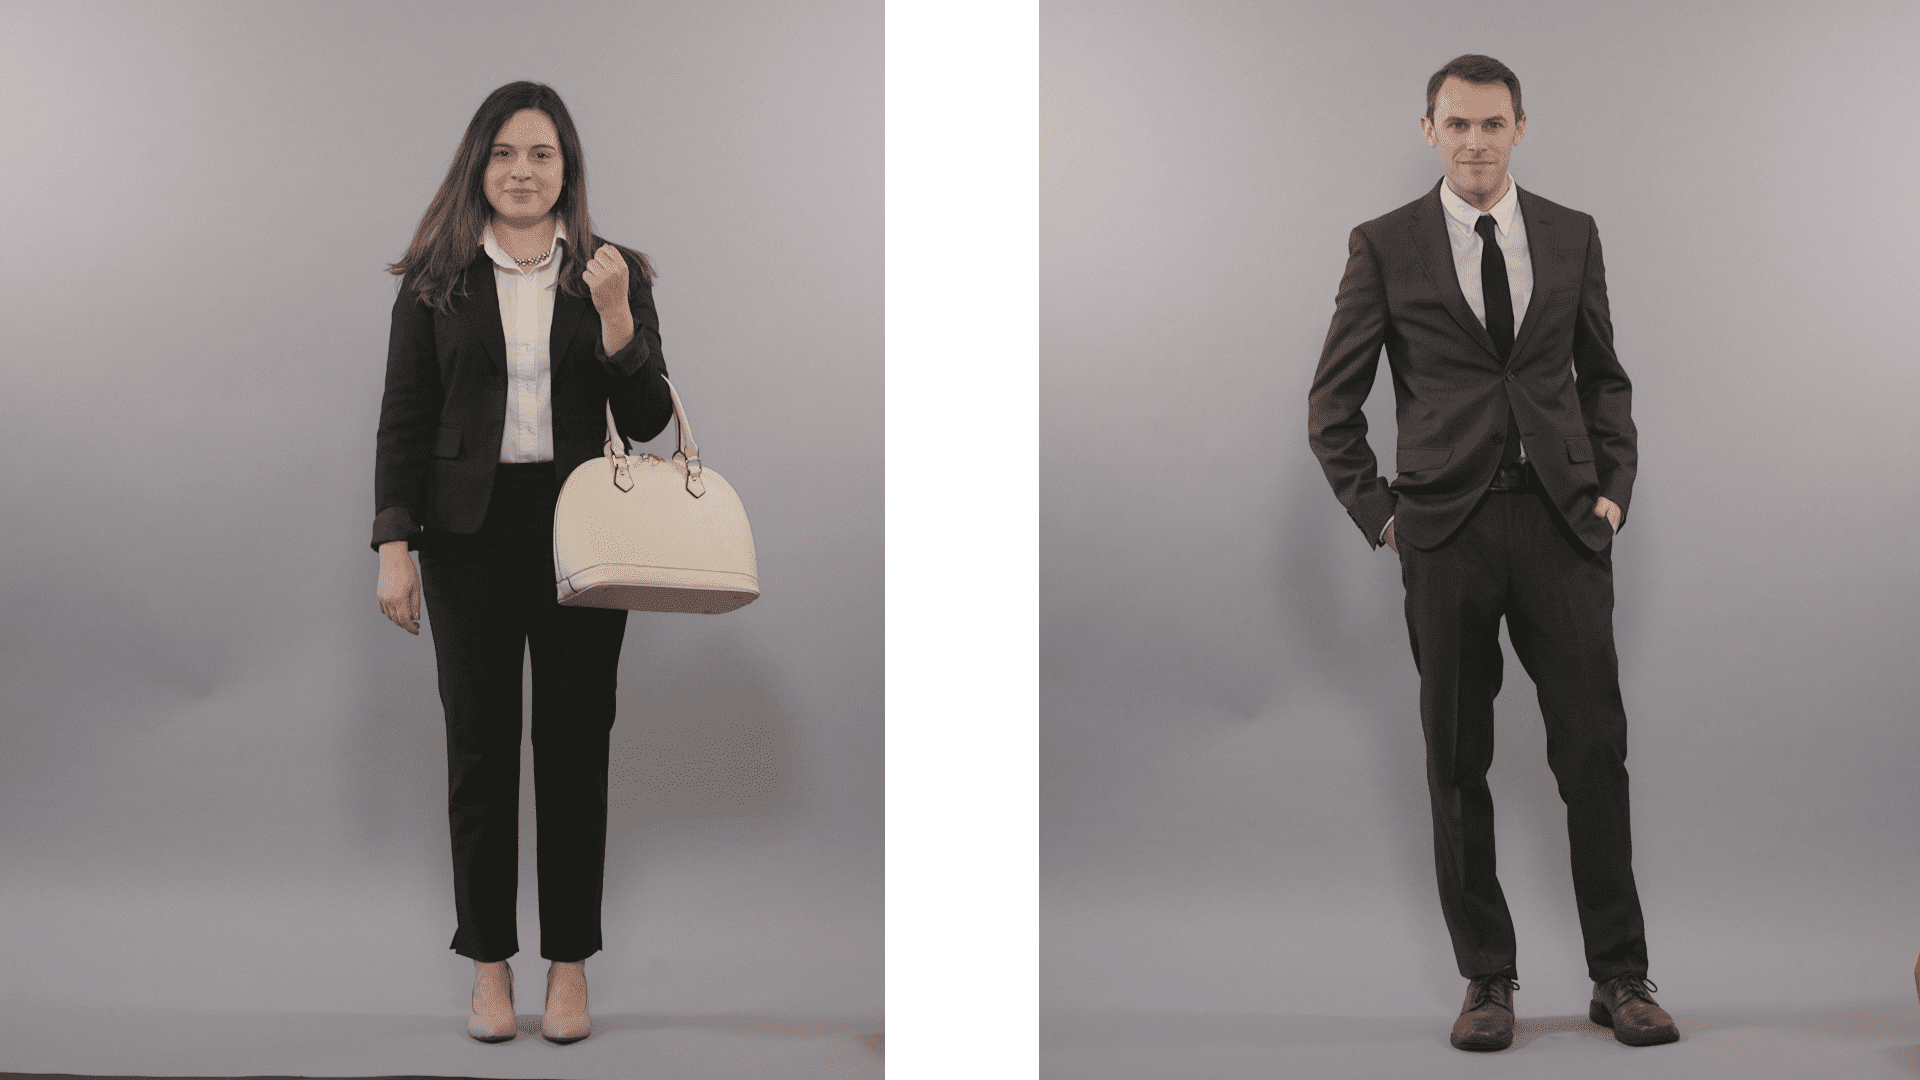 3 Ways to Dress for an Interview (Women) - wikiHow